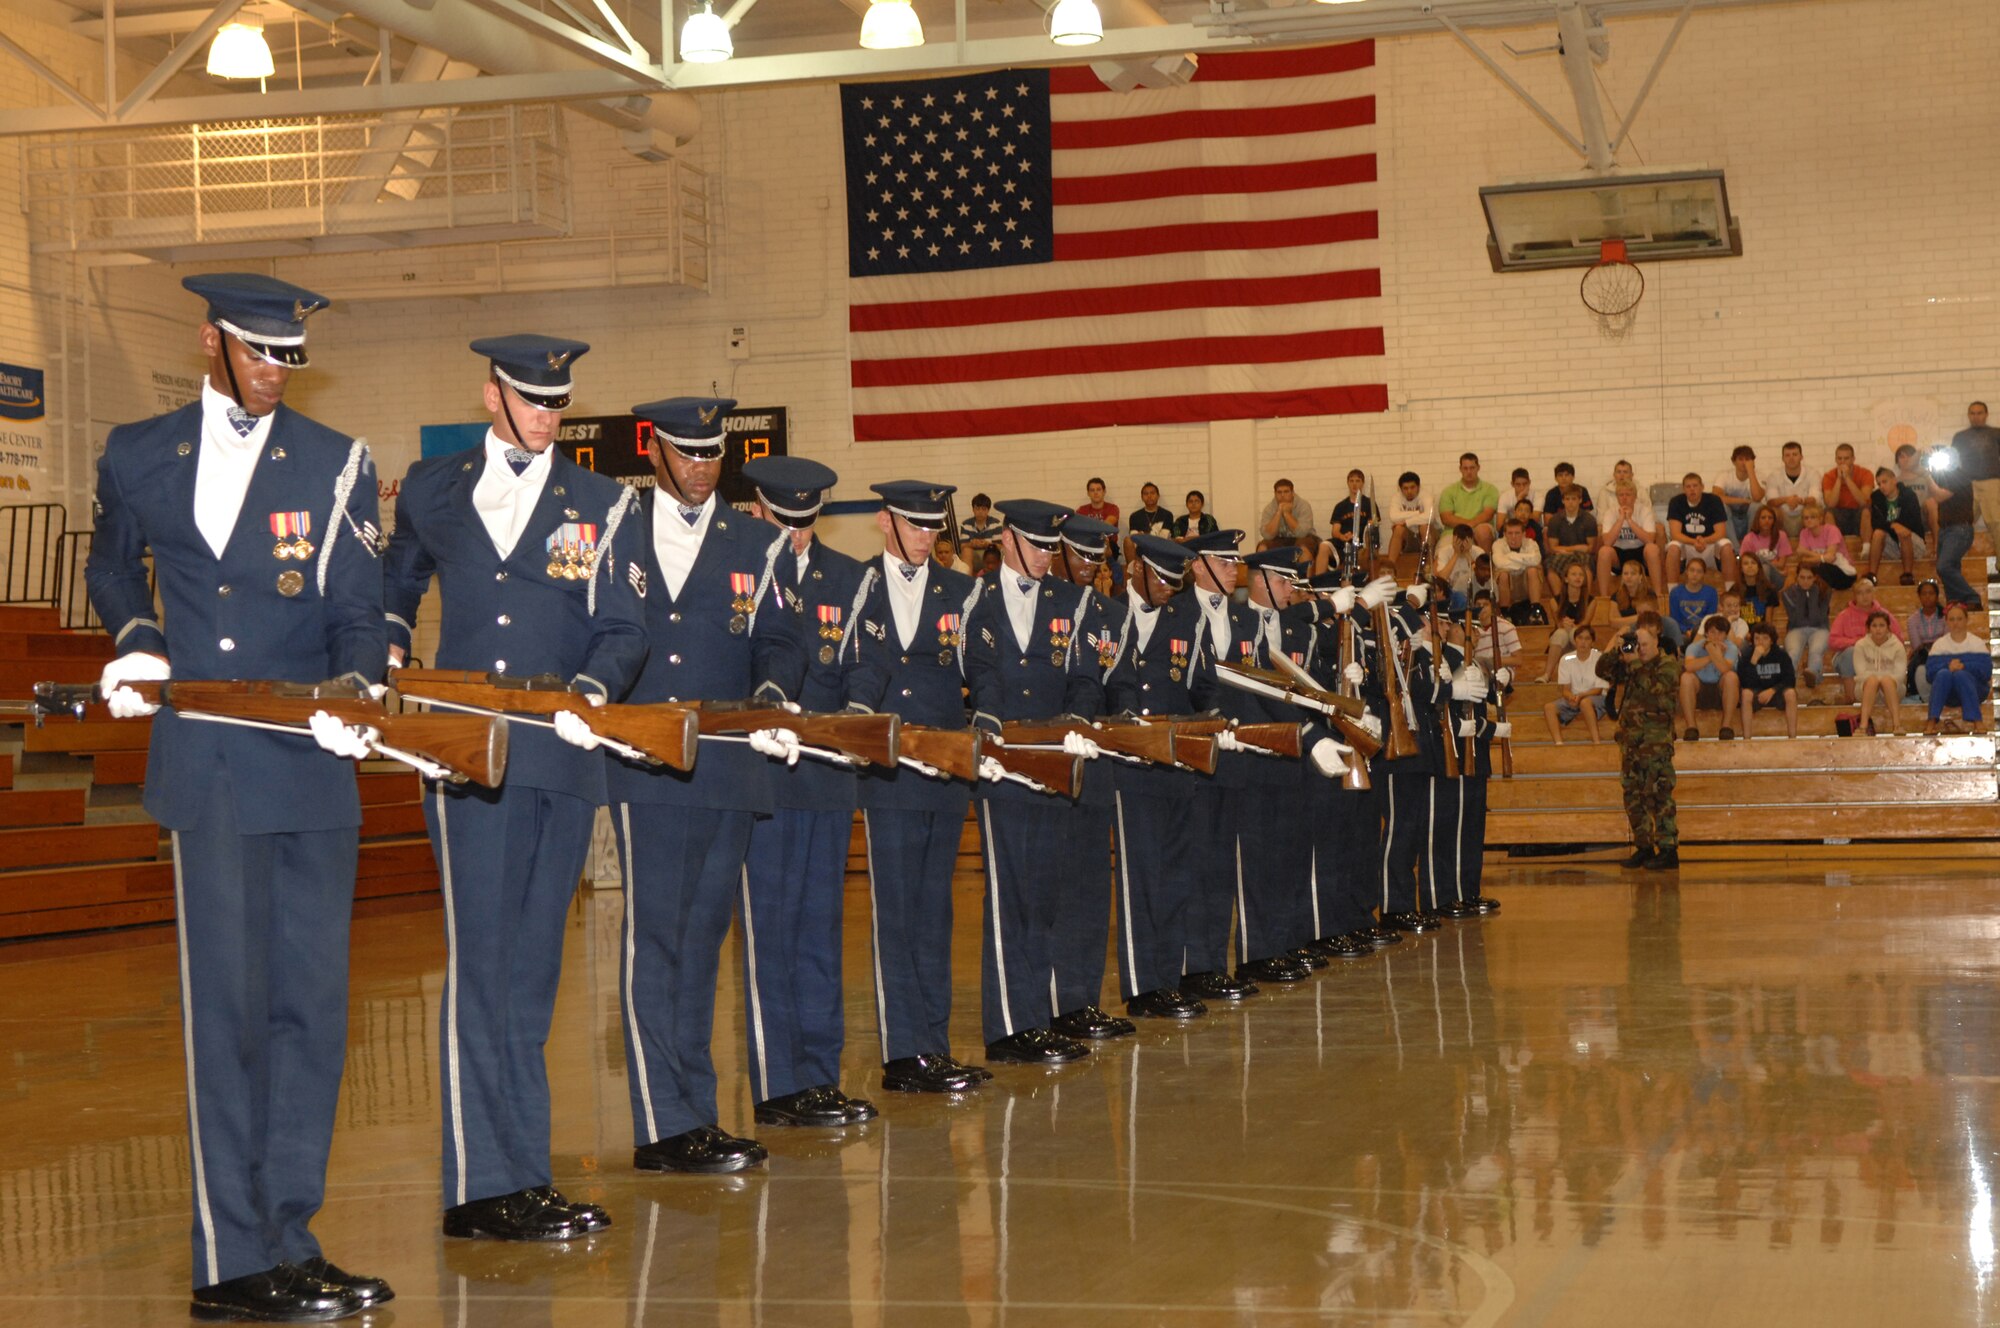 Members of the Air Force Honor Guard Drill Team perform at Etowah High School in Etowah, Ga. on October 10, 2007.  The drill team visited several area high schools, with other Air Force demo teams, as part of Air Force Week Atlanta events leading up to the Great Georgia Air Show in Peachtree City, Ga., and promoted the AF mission by showcasing drill performances at public and military venues to recruit, retain, and inspire Airmen. ( U.S. Air Force photo/Airman First Class Tim Chacon)(Released)